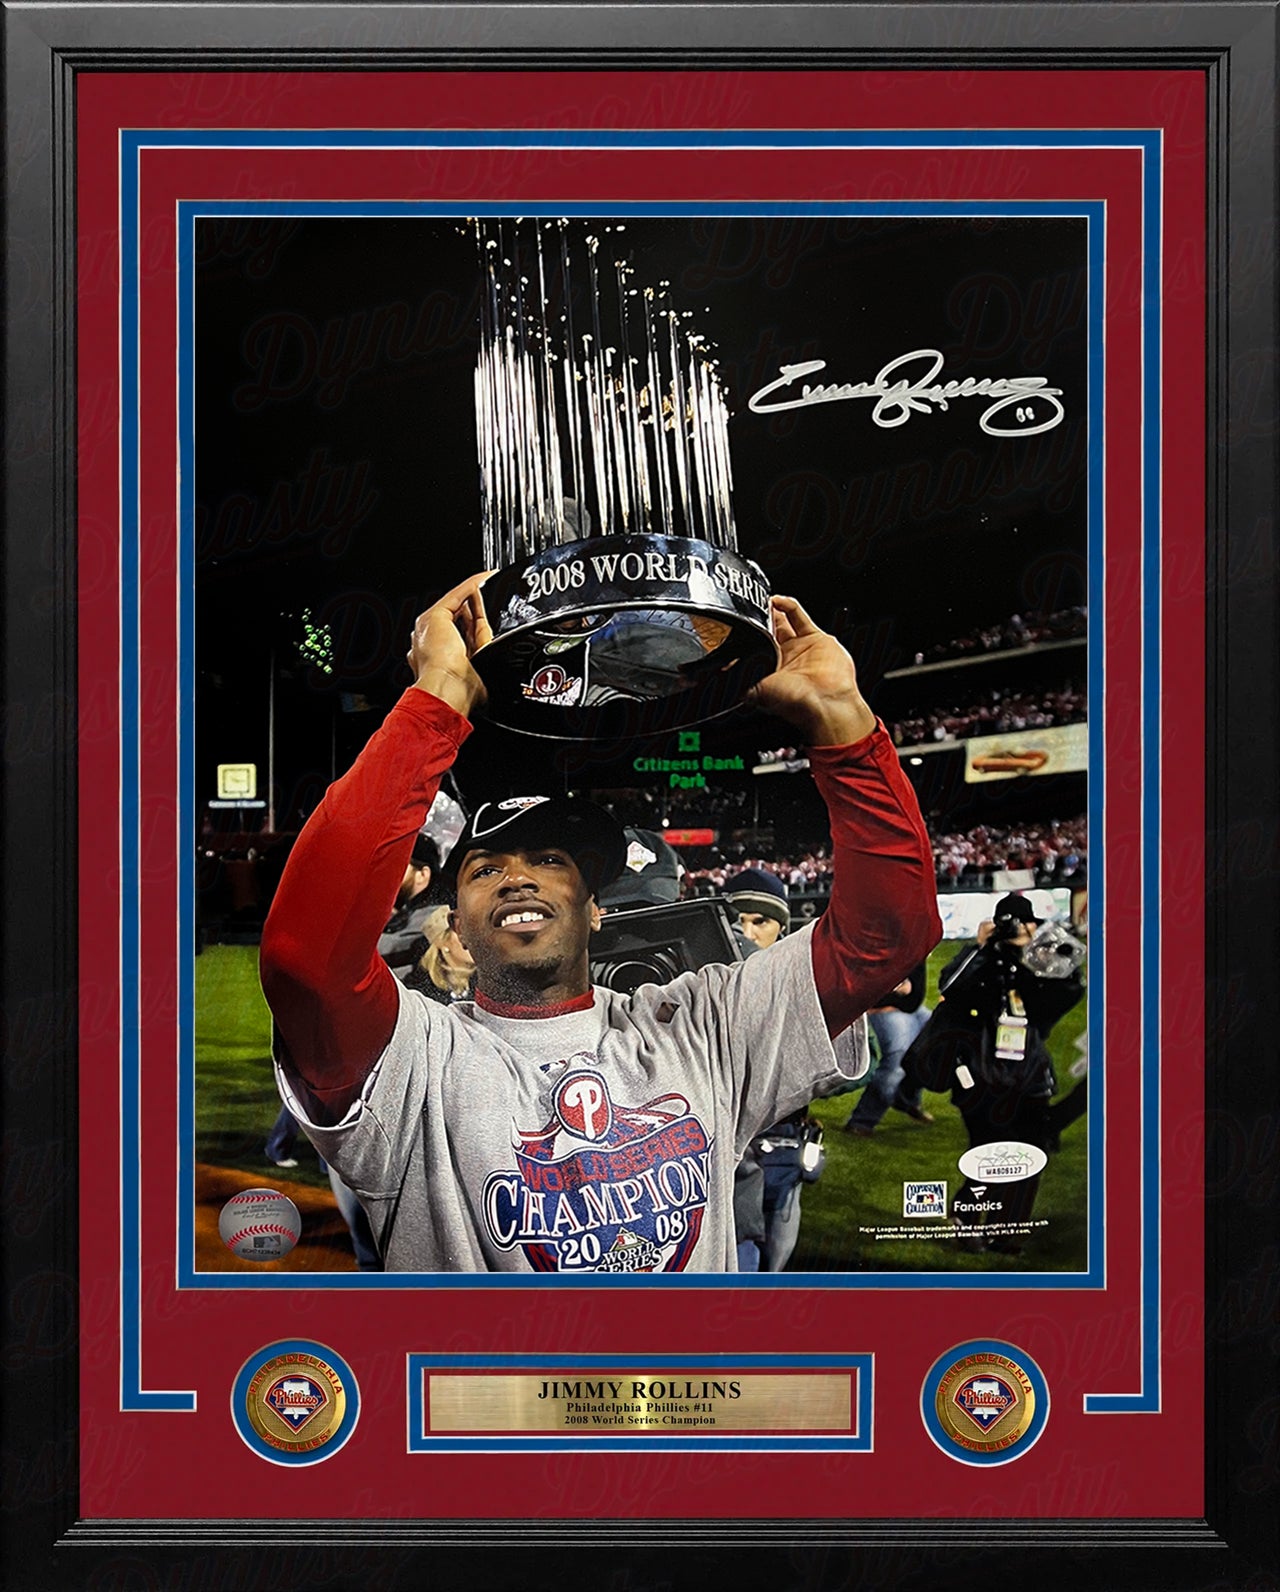 Jimmy Rollins 2008 World Series Trophy Autographed Philadelphia Phillies 11x14 Framed Photo - JSA Authenticated - Dynasty Sports & Framing 